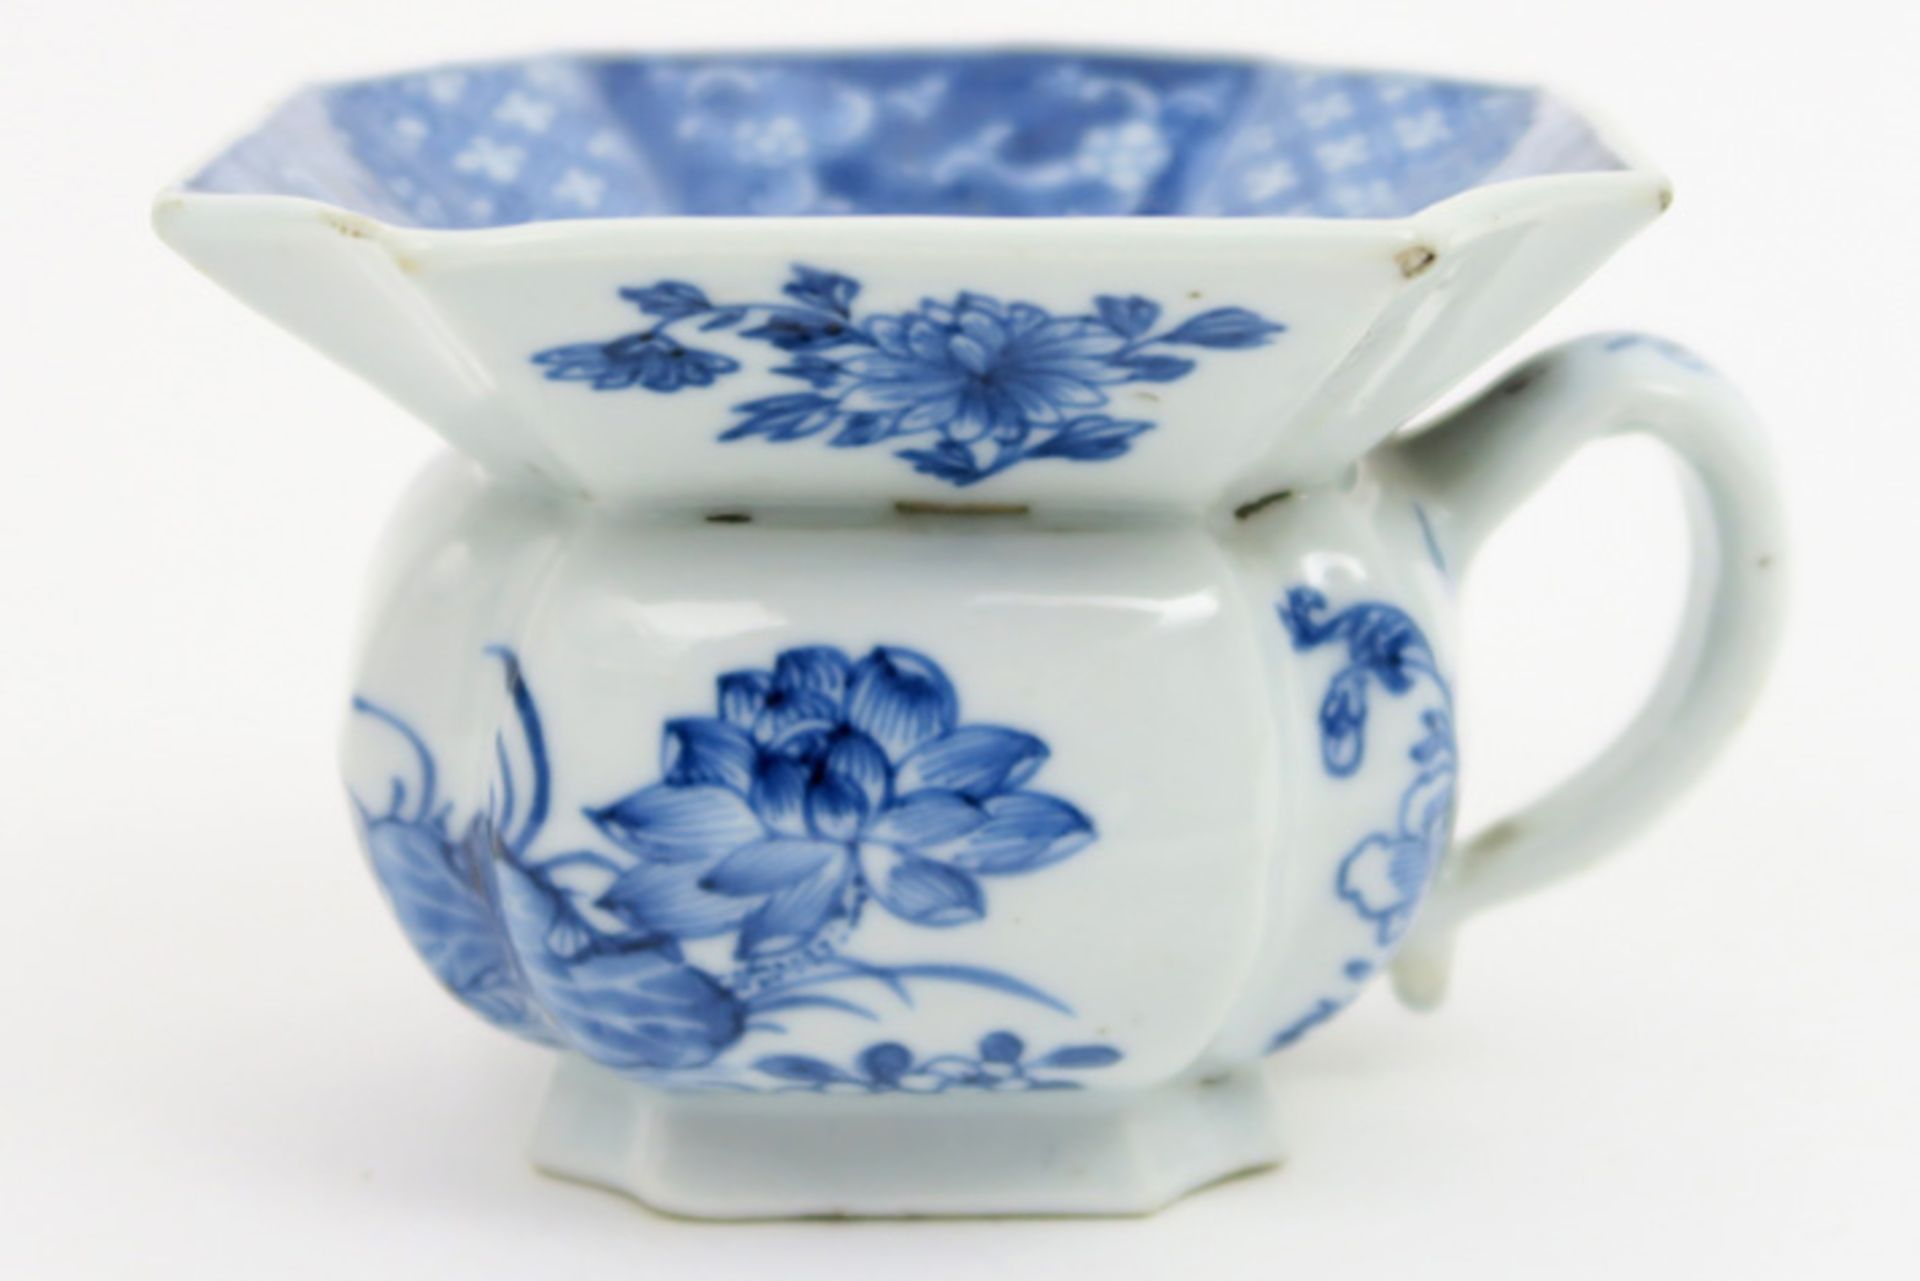 because of the small size rare 17th/18th Cent. Chinese Kang Xi spittoon in porcelain with a blue